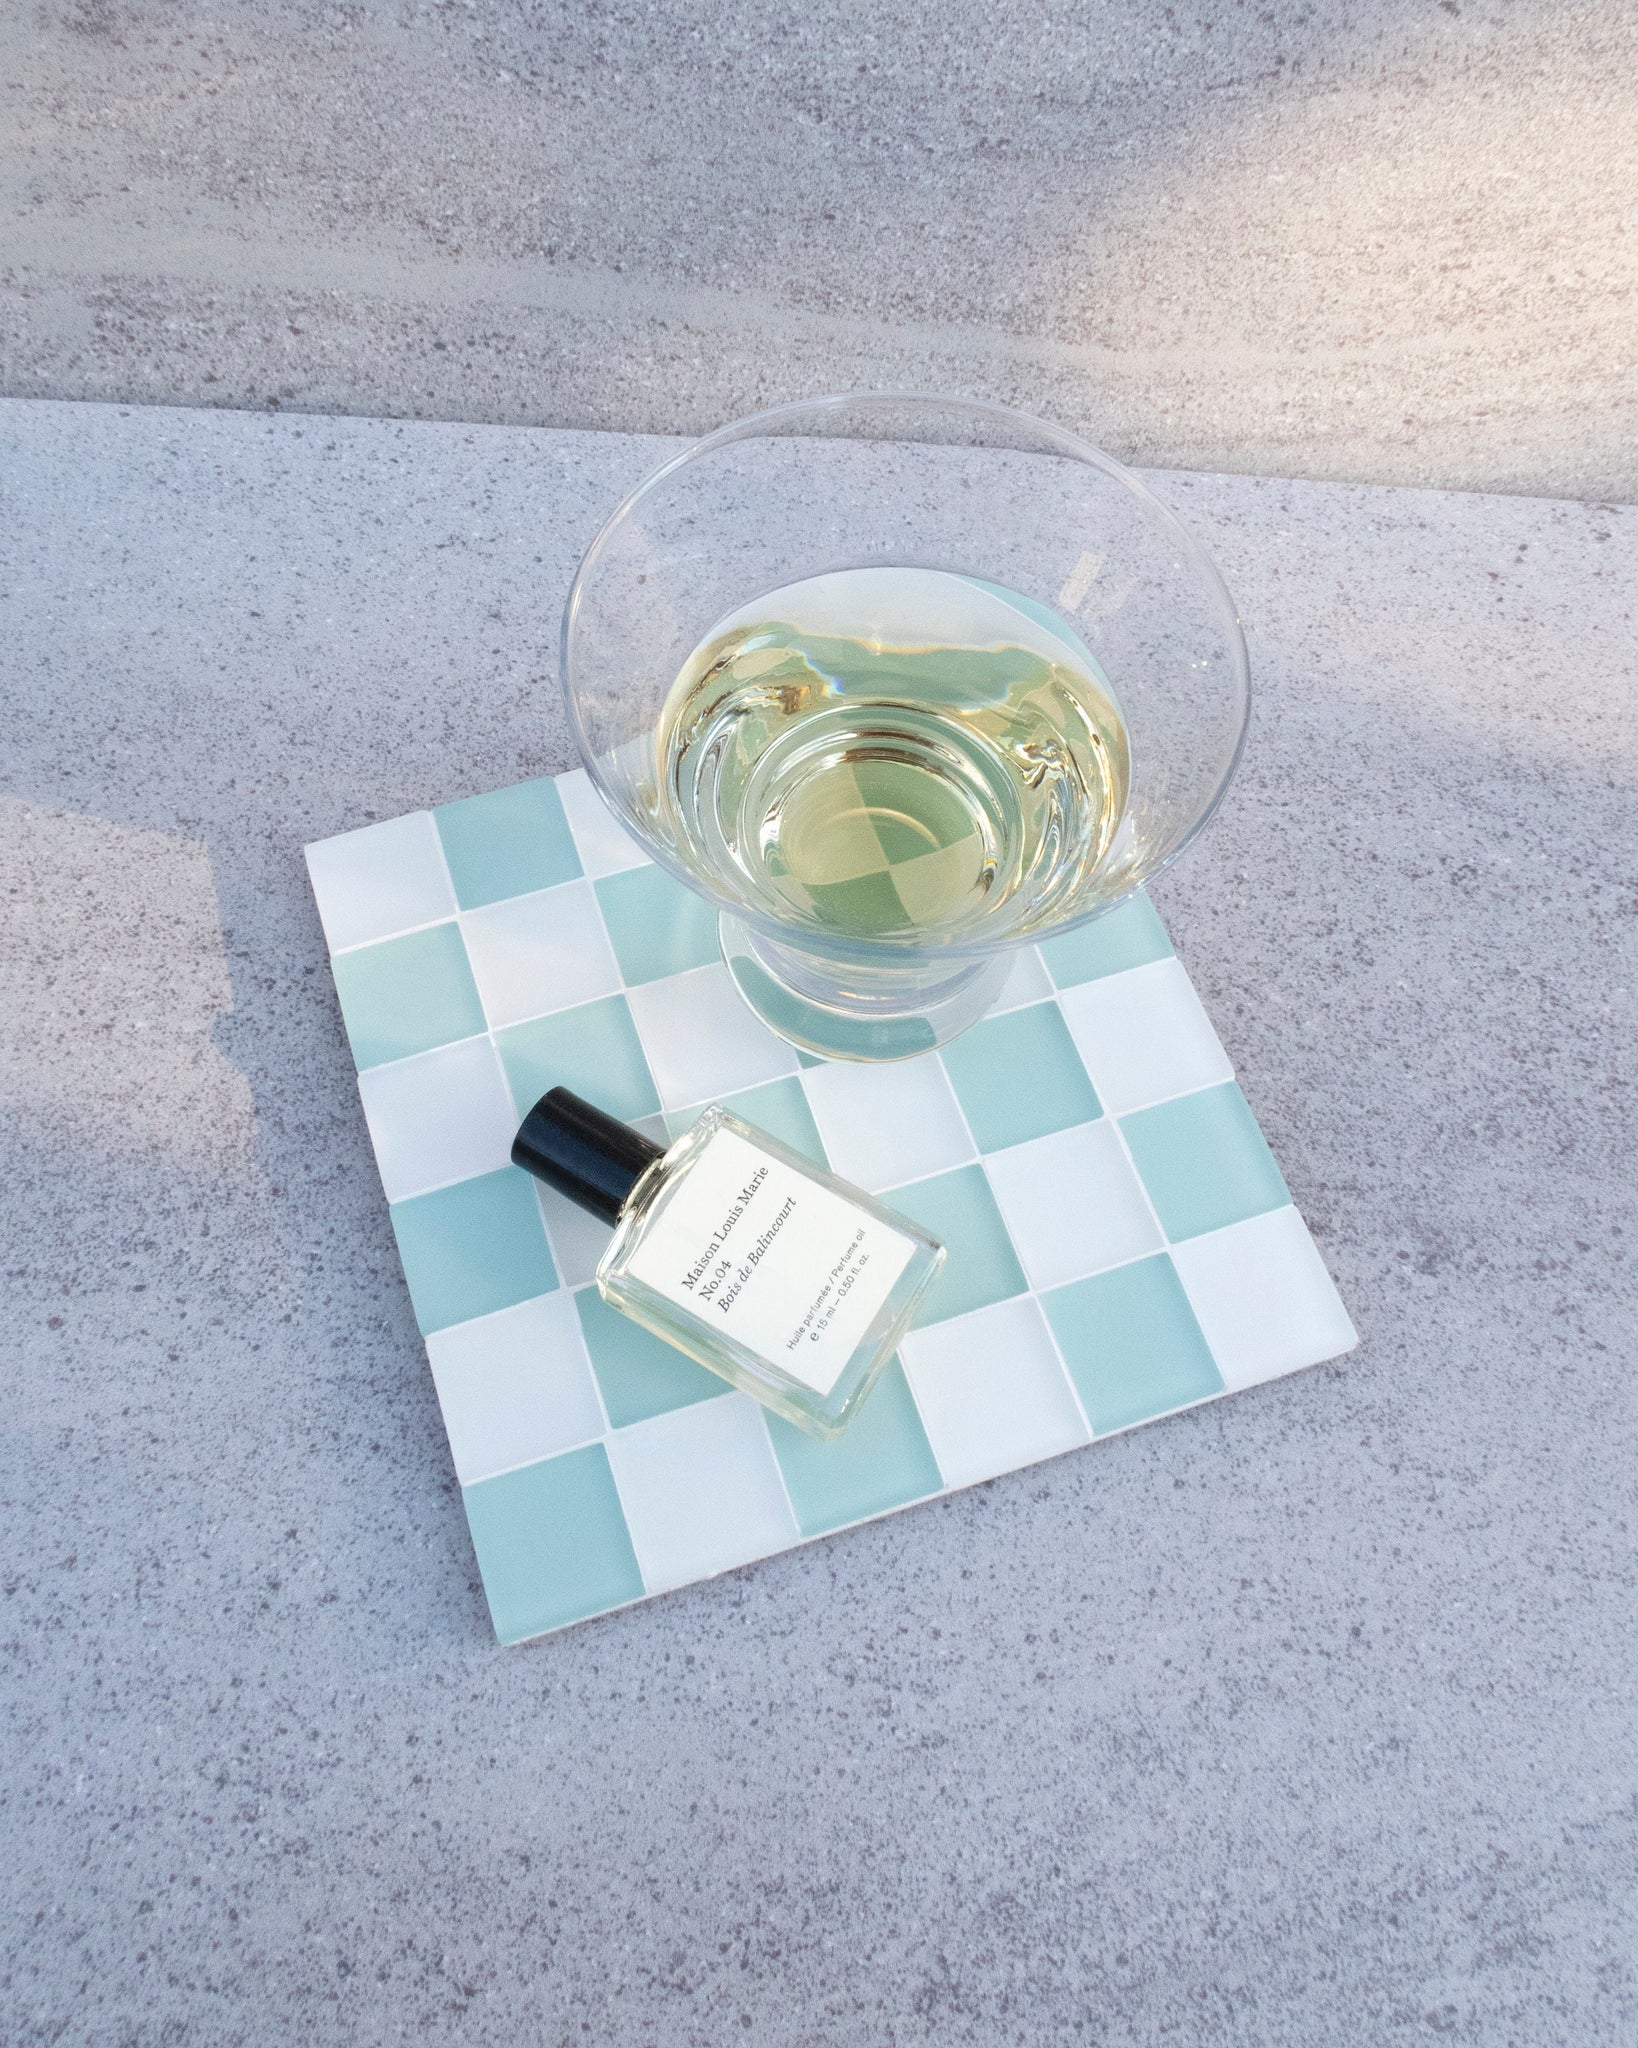 Glass Tile Decorative Tray | Placemats | Table Decors | Tabletop | Housewarming Gift | Jewelry Display | Food Display | Birthday Gift